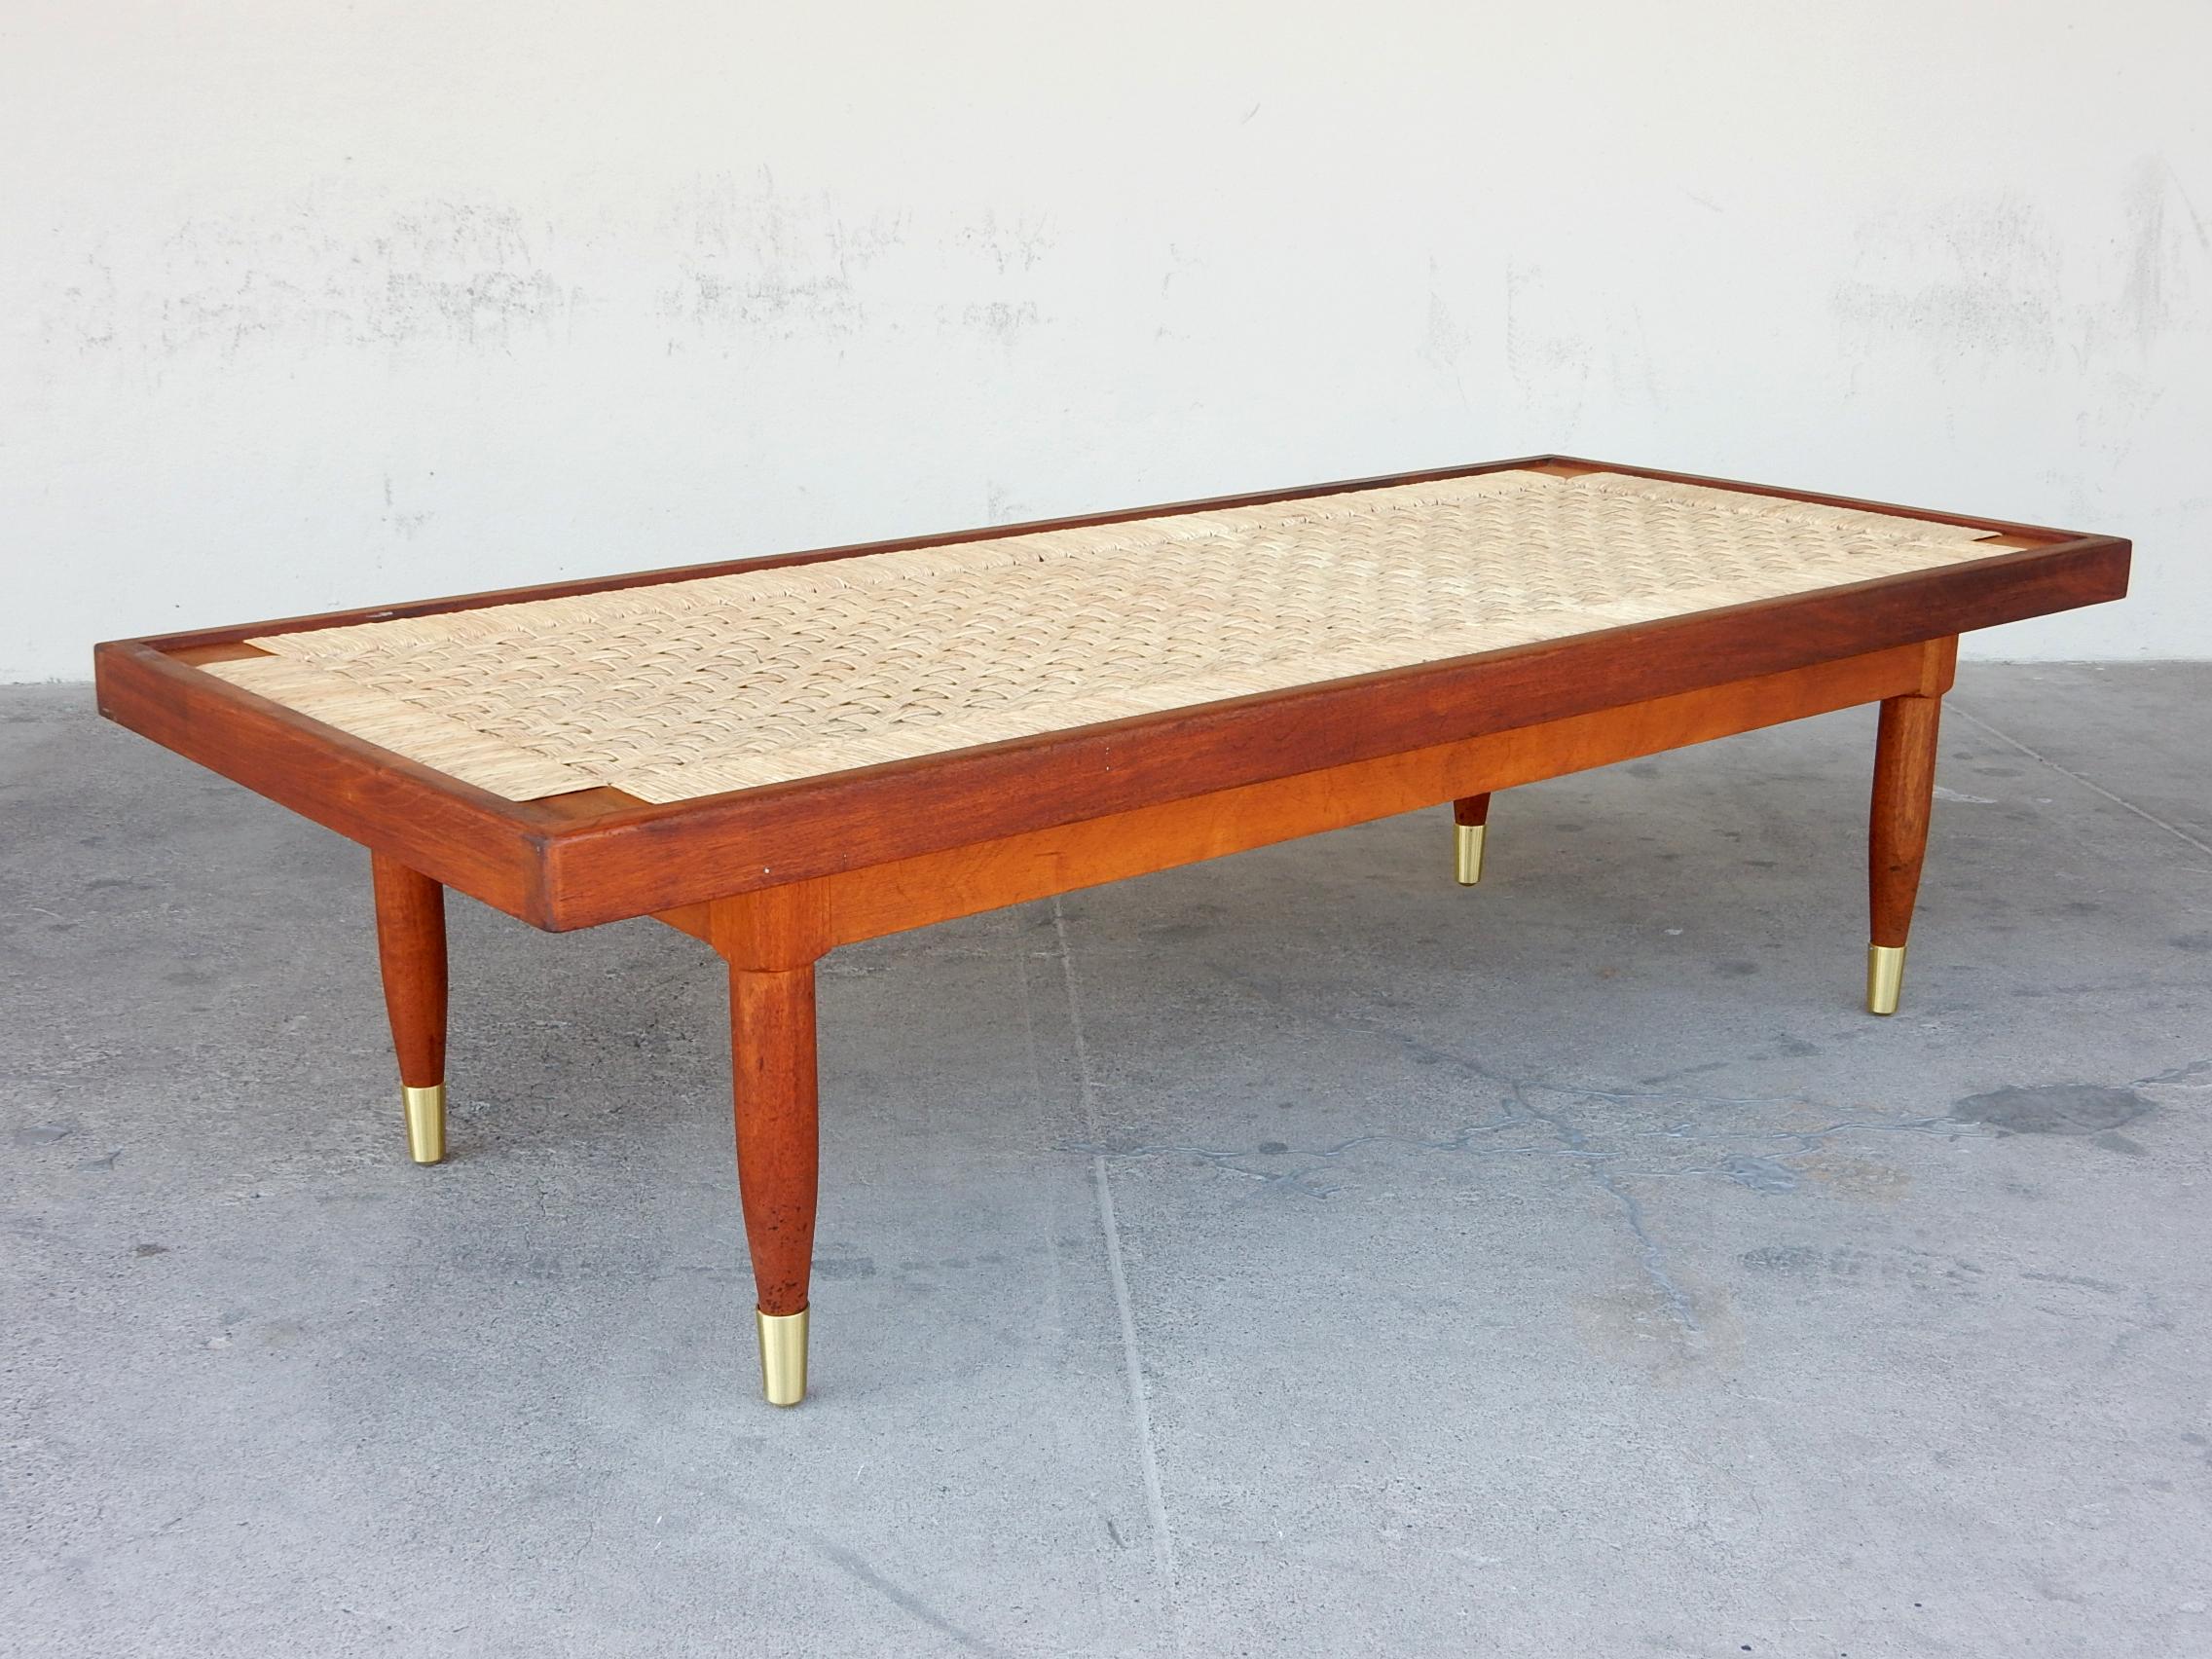 Attributed Michael van Beuren design coffee table, Mexico, circa 1950's.
2-tone hardwood frame with
an under-frame strung with rattan, woven in a
multi-strand basket weave resembling a checkerboard.
An inset piece of glass brings the table